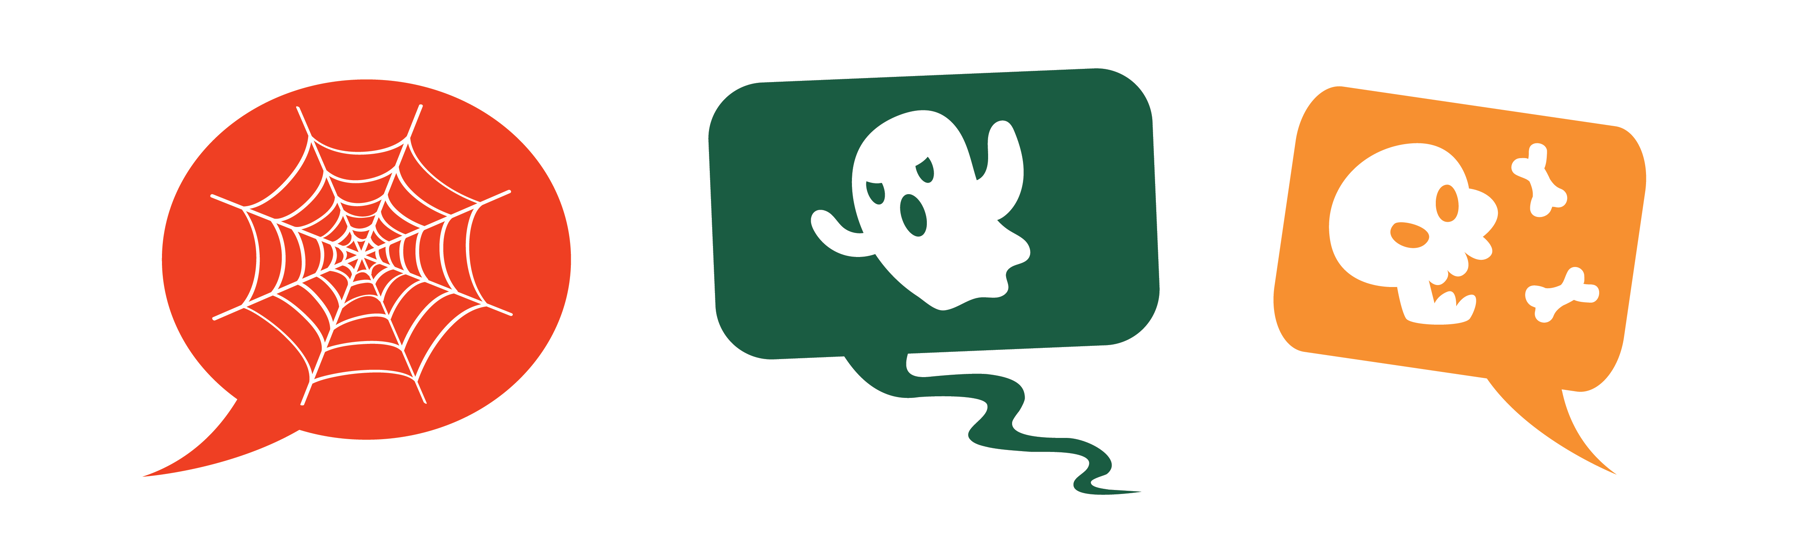 The image shows three graphics. The left one is a red speech bubble with a white spider's web in the middle, the middle one is a green rectangular shaped speech bubble with a white ghost inside. Then the right speech bubble is square and orange, with a white skull and bones in the middle.